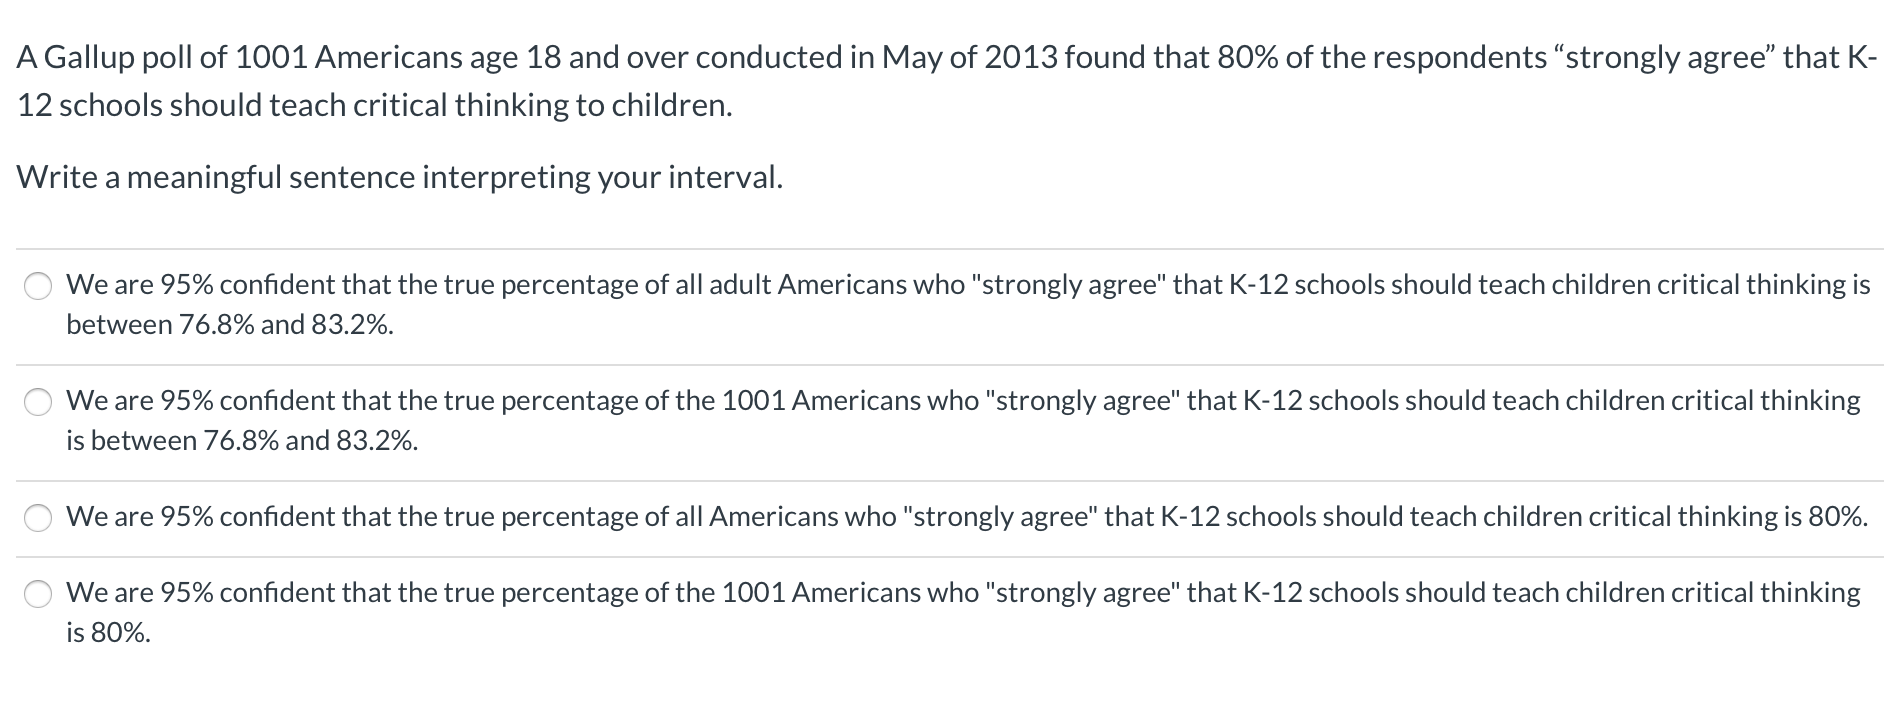 A Gallup poll of 1001 Americans age 18 and over conducted in May of 2013 found that 80% of the respondents "strongly agree" that K-
12 schools should teach critical thinking to children.
Write a meaningful sentence interpreting your interval.
We are 95% confident that the true percentage of all adult Americans who "strongly agree" that K-12 schools should teach children critical thinking is
between 76.8% and 83.2%.
We are 95% confident that the true percentage of the 1001 Americans who "strongly agree" that K-12 schools should teach children critical thinking
is between 76.8% and 83.2%.
We are 95% confident that the true percentage of all Americans who "strongly agree" that K-12 schools should teach children critical thinking is 80%.
We are 95% confident that the true percentage of the 1001 Americans who "strongly agree" that K-12 schools should teach children critical thinking
is 80%.
